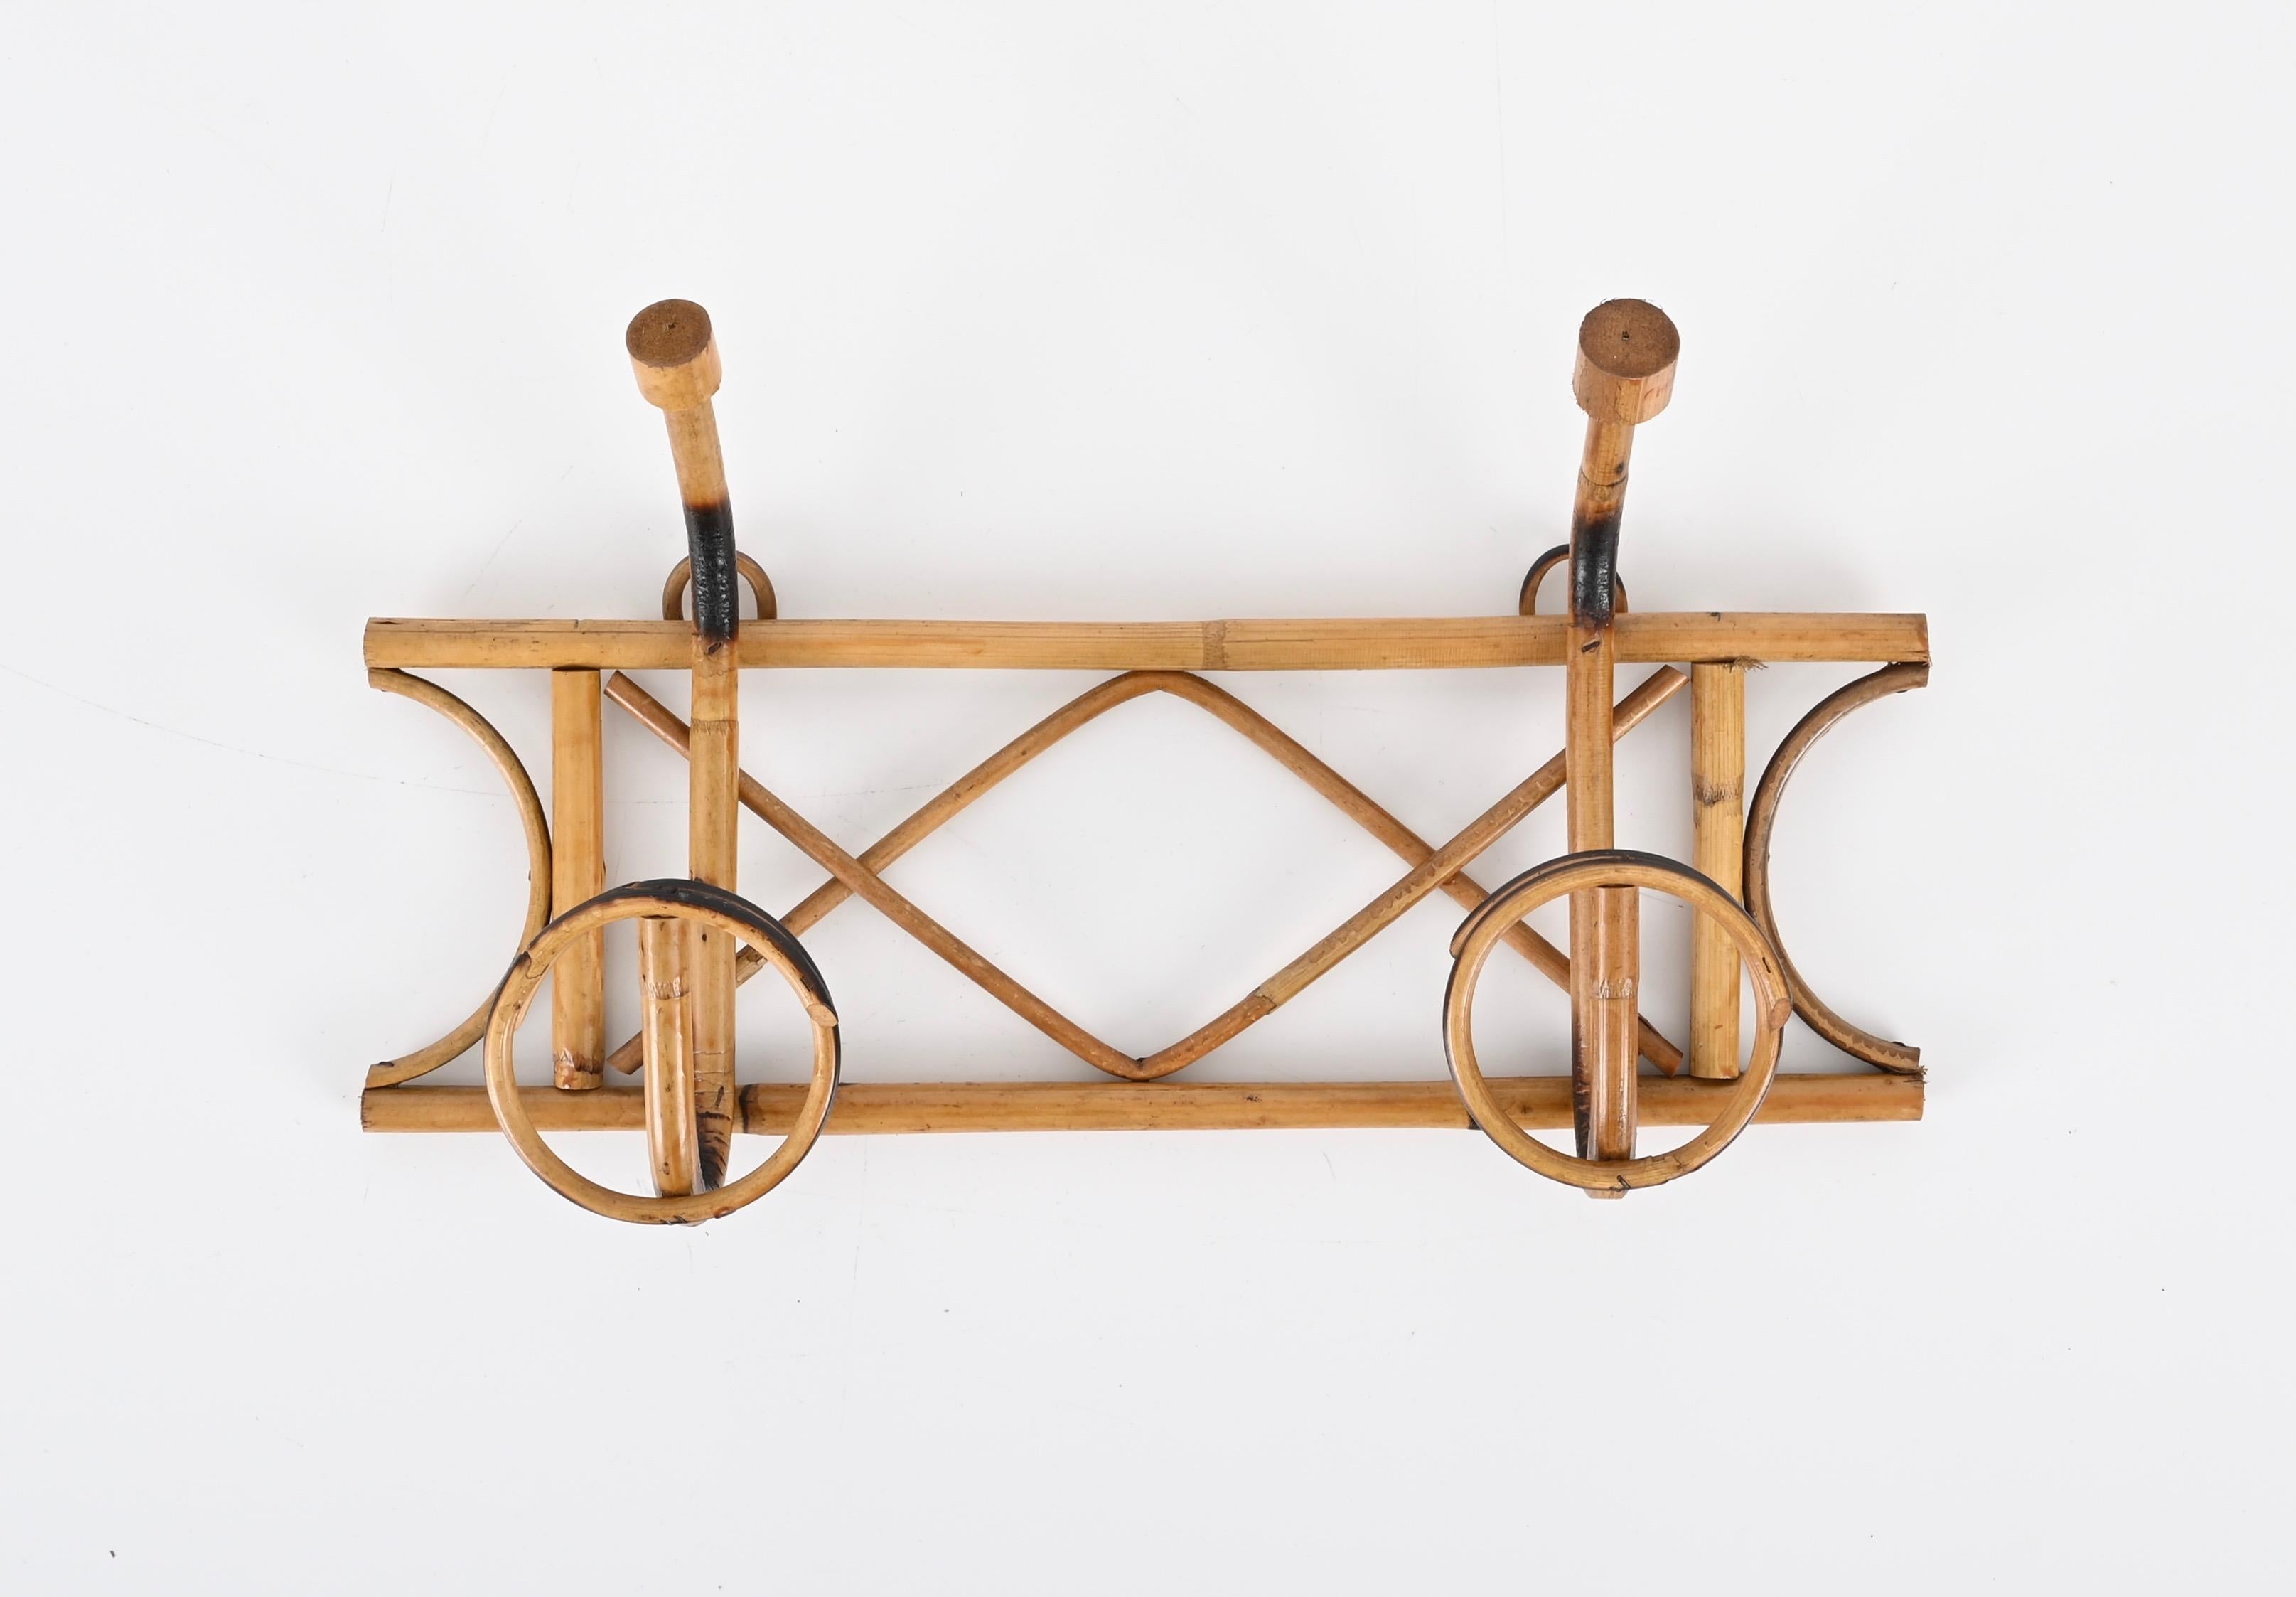 Beautiful Riviera style wall coat hanger, entirely made in curved rattan and bamboo. This lovely French Riviera coat hanger was made in Italy in during the 1960s.

This stunning item features a bamboo cane frame and two curved rattan top hooks and